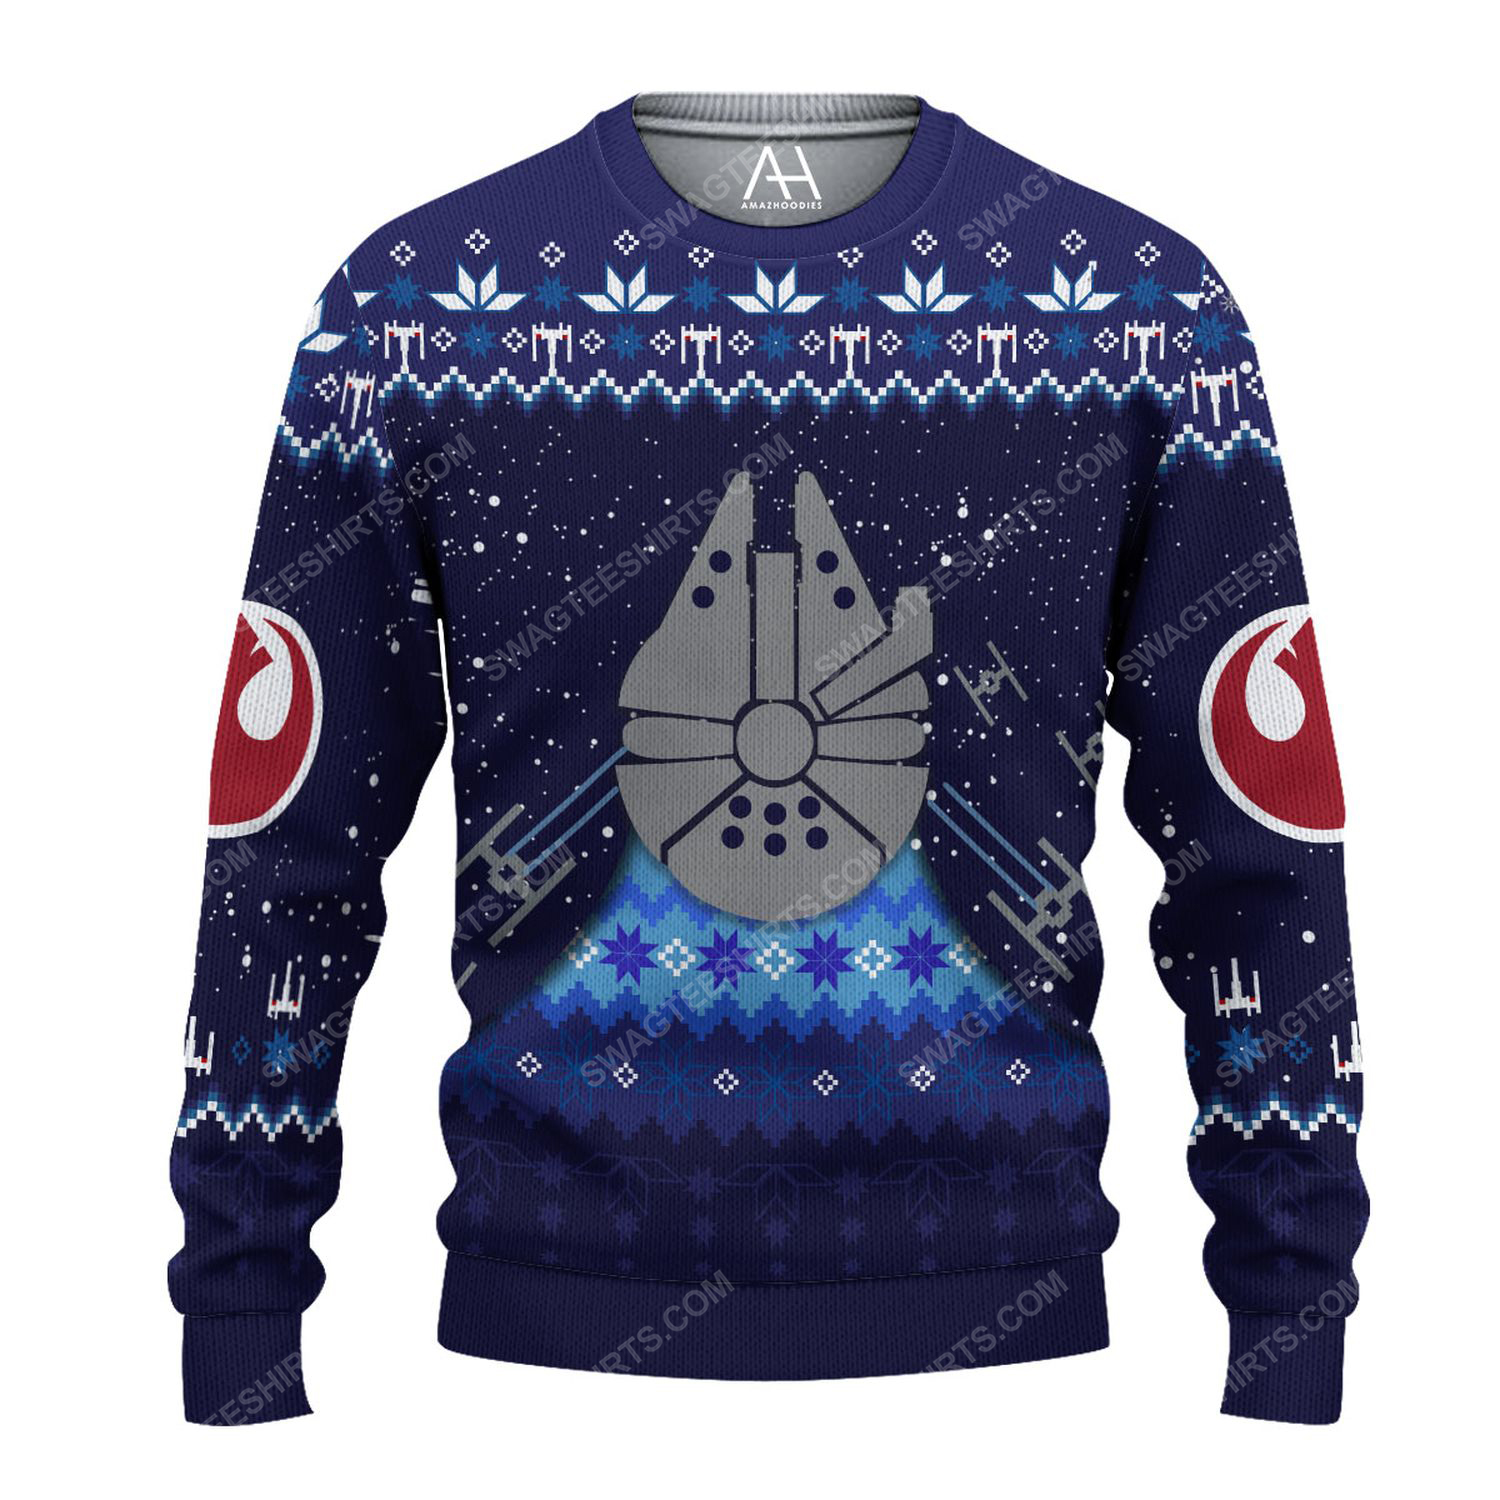 Star wars spaceships ugly christmas sweater 1 - Copy (3)